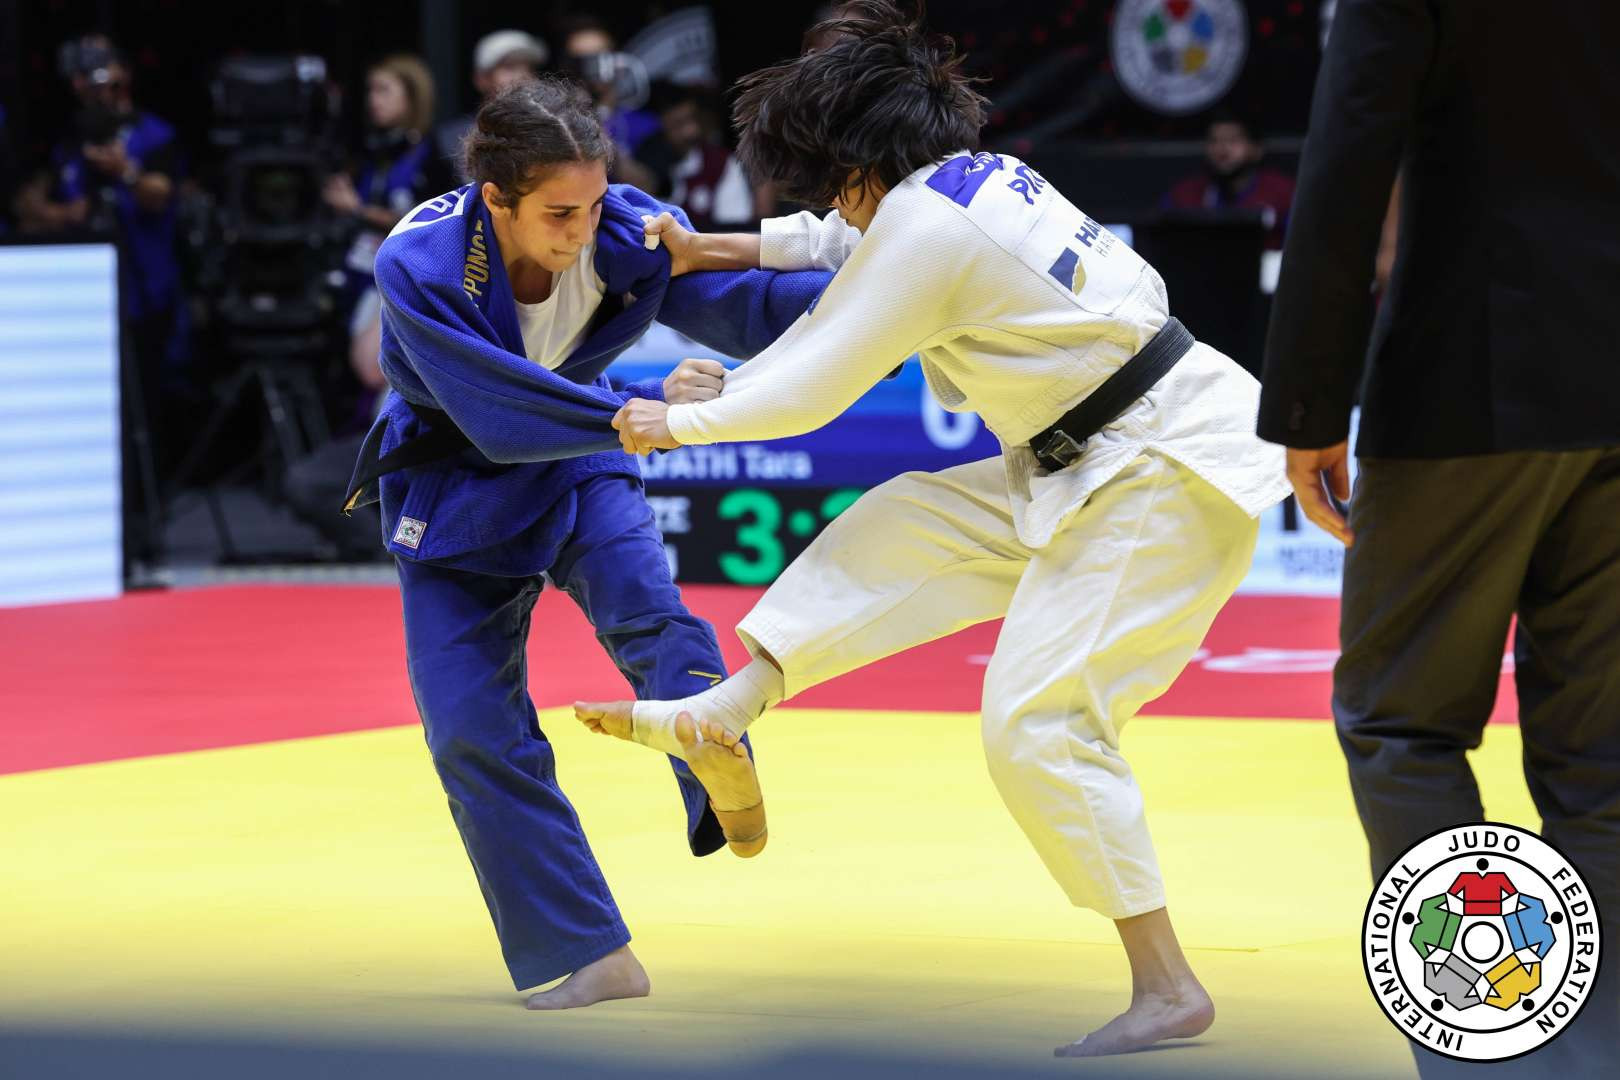 Judo is becoming more popular in schools across the world. INTERNATIONAL JUDO FEDERATION